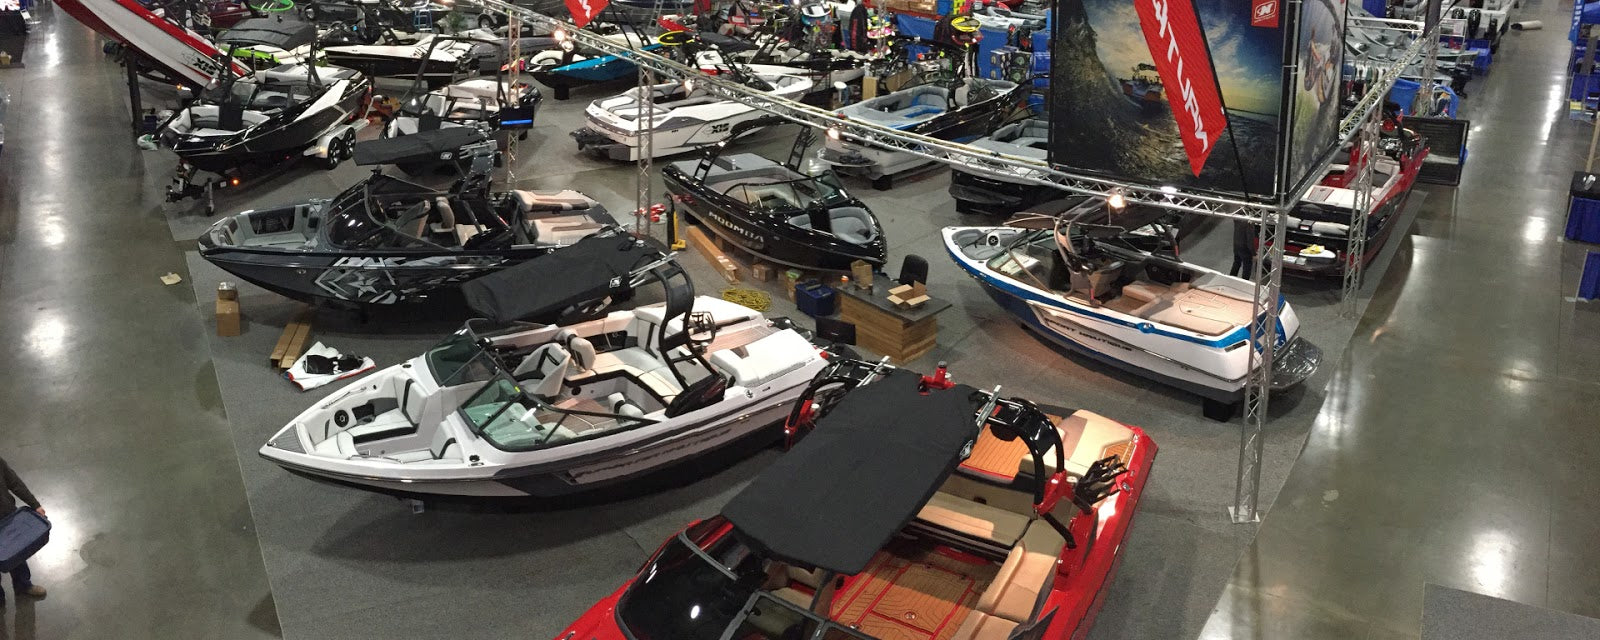 The Portland Boat Show Is Just Around the Corner